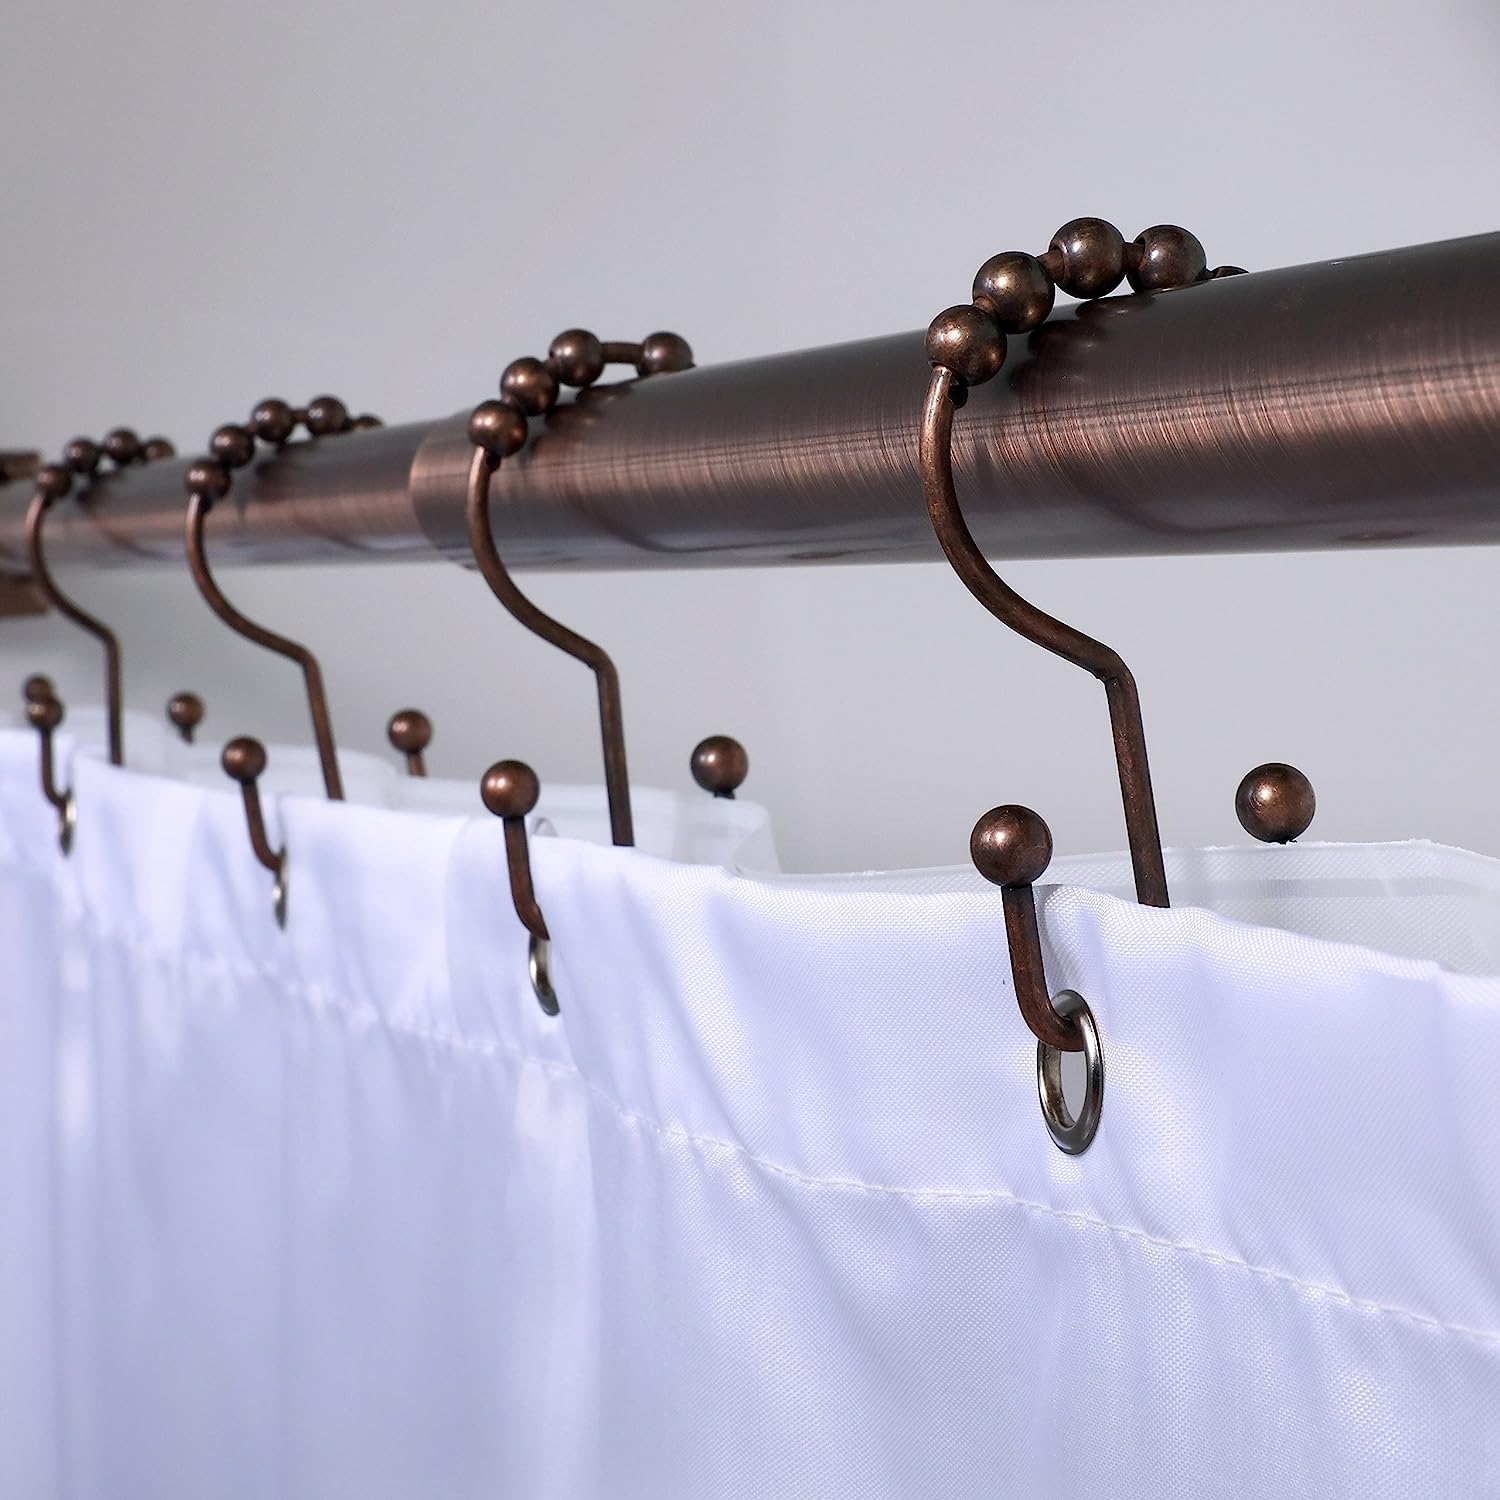 Ripple Fold is a type of curtain hooks